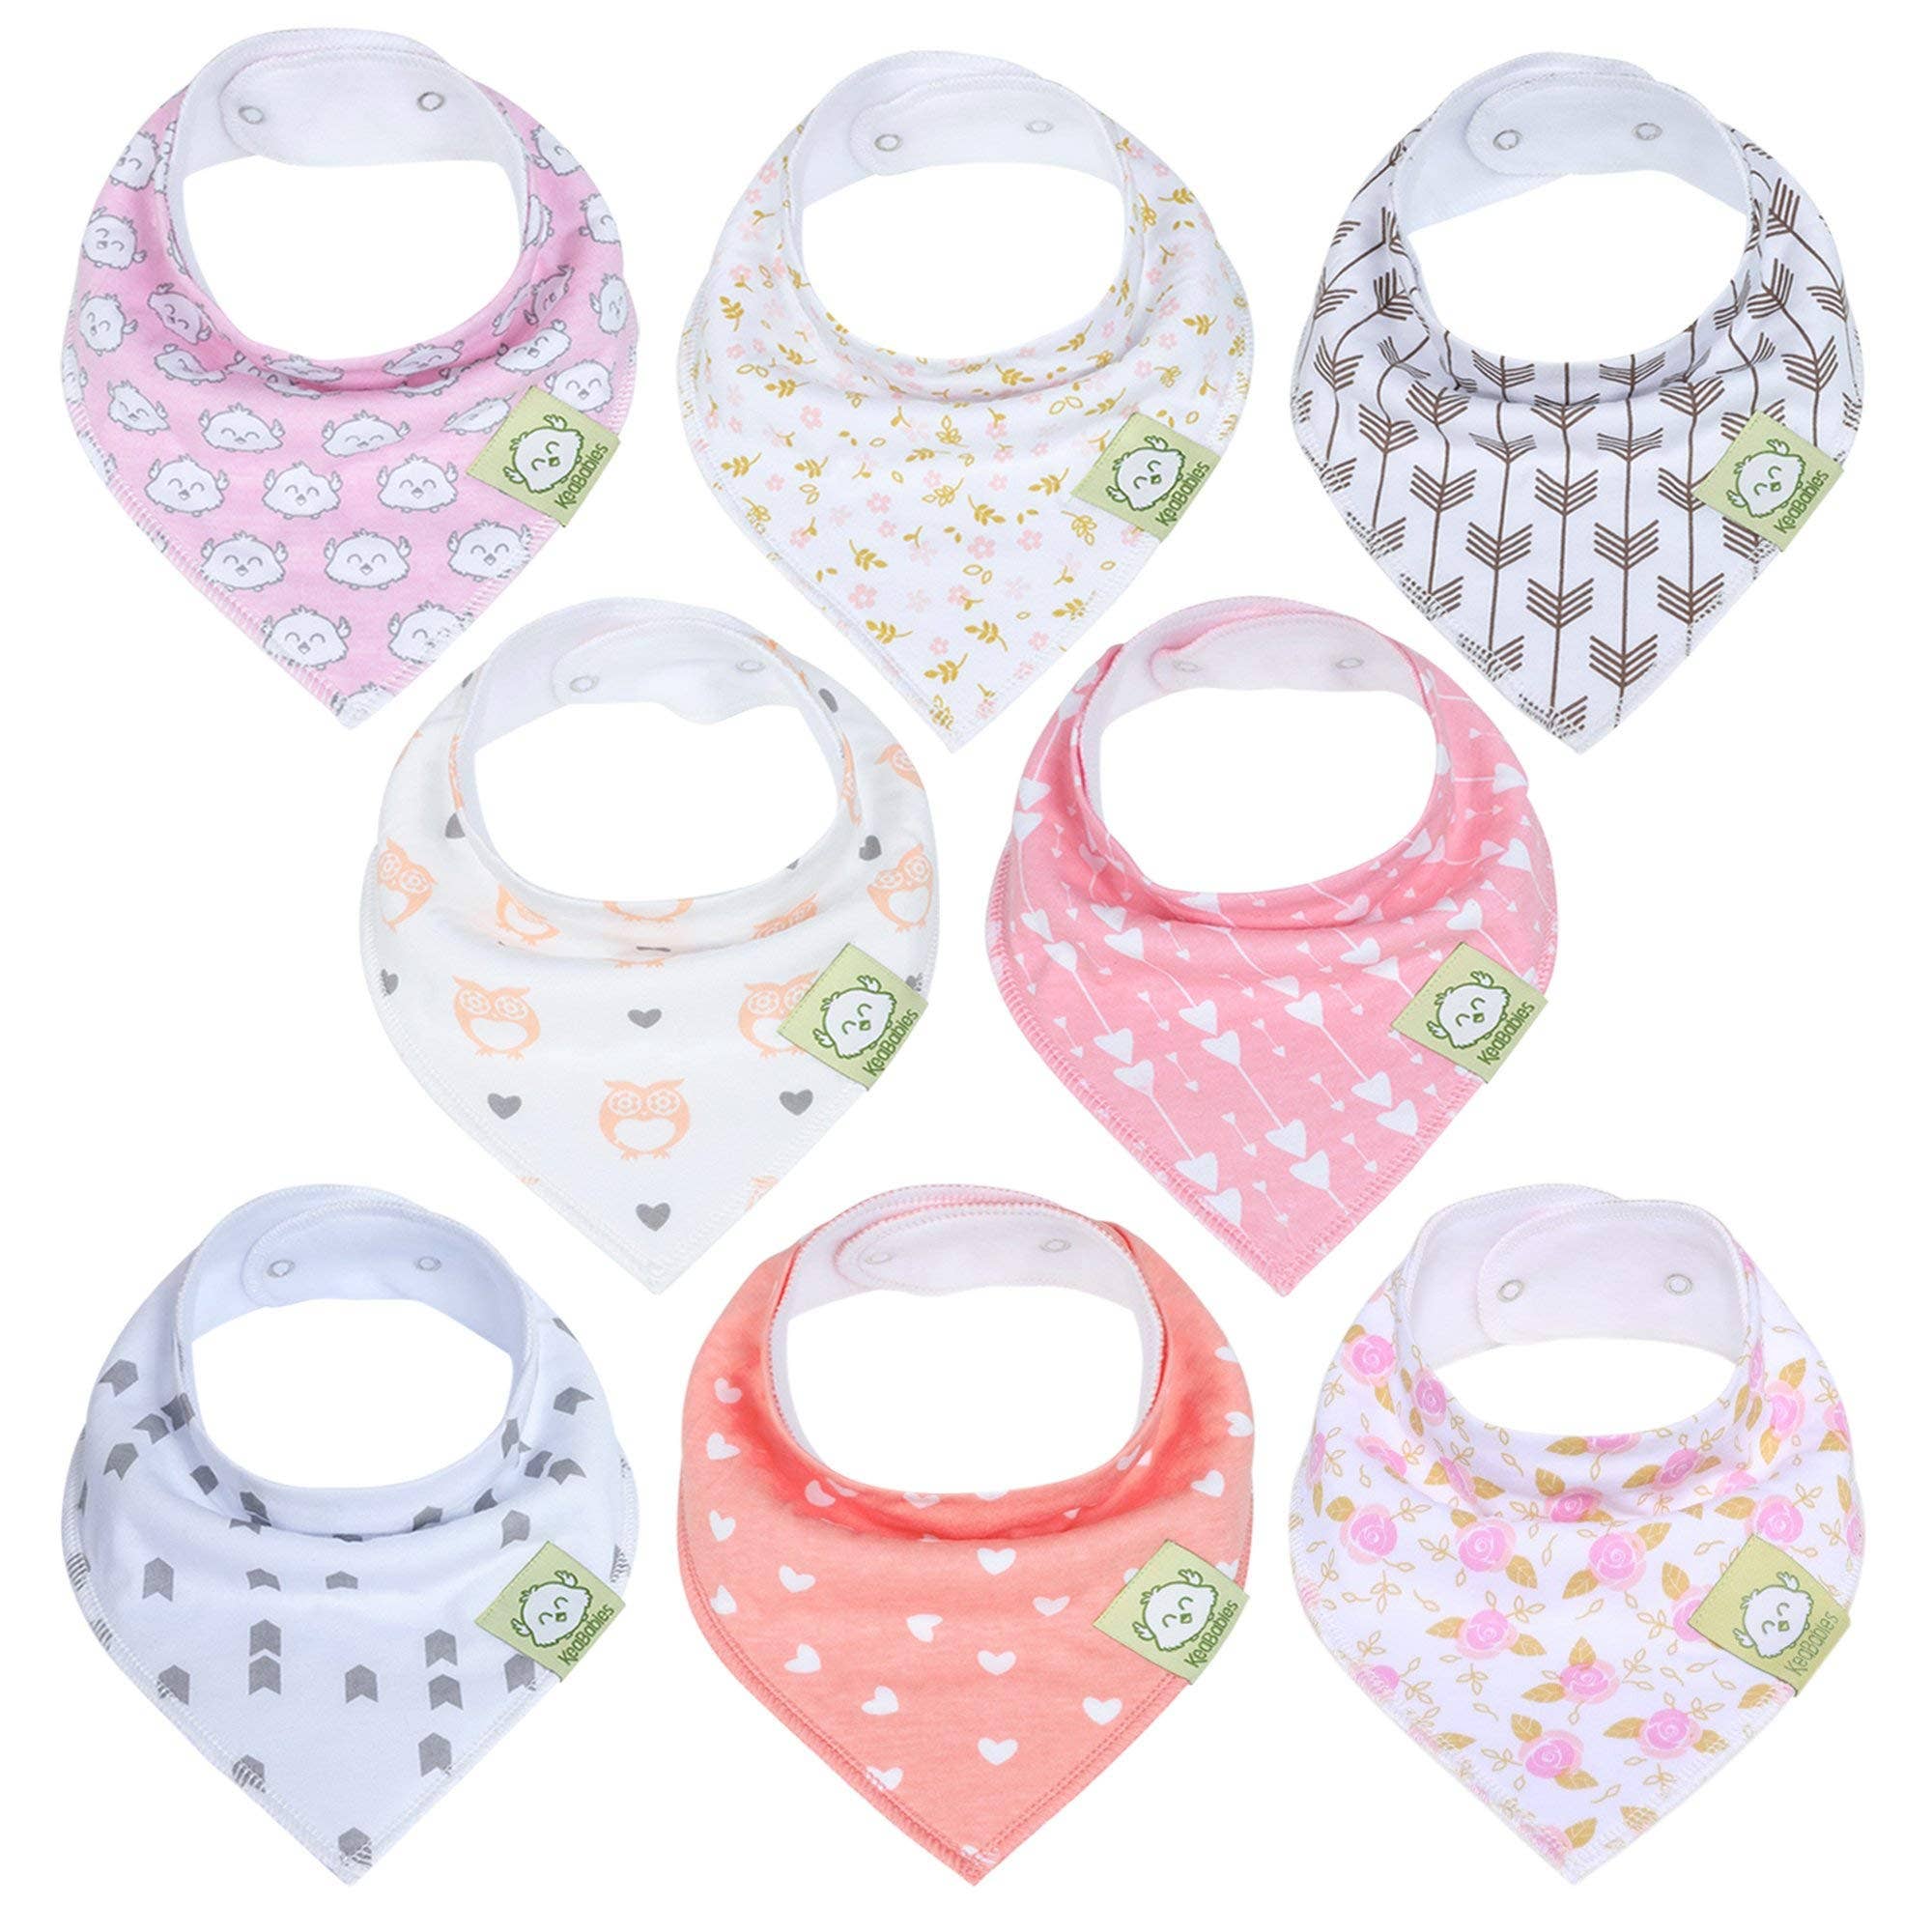 GOTS cotton baby bibs, baby gifts, baby shower, Lemon and Lavender